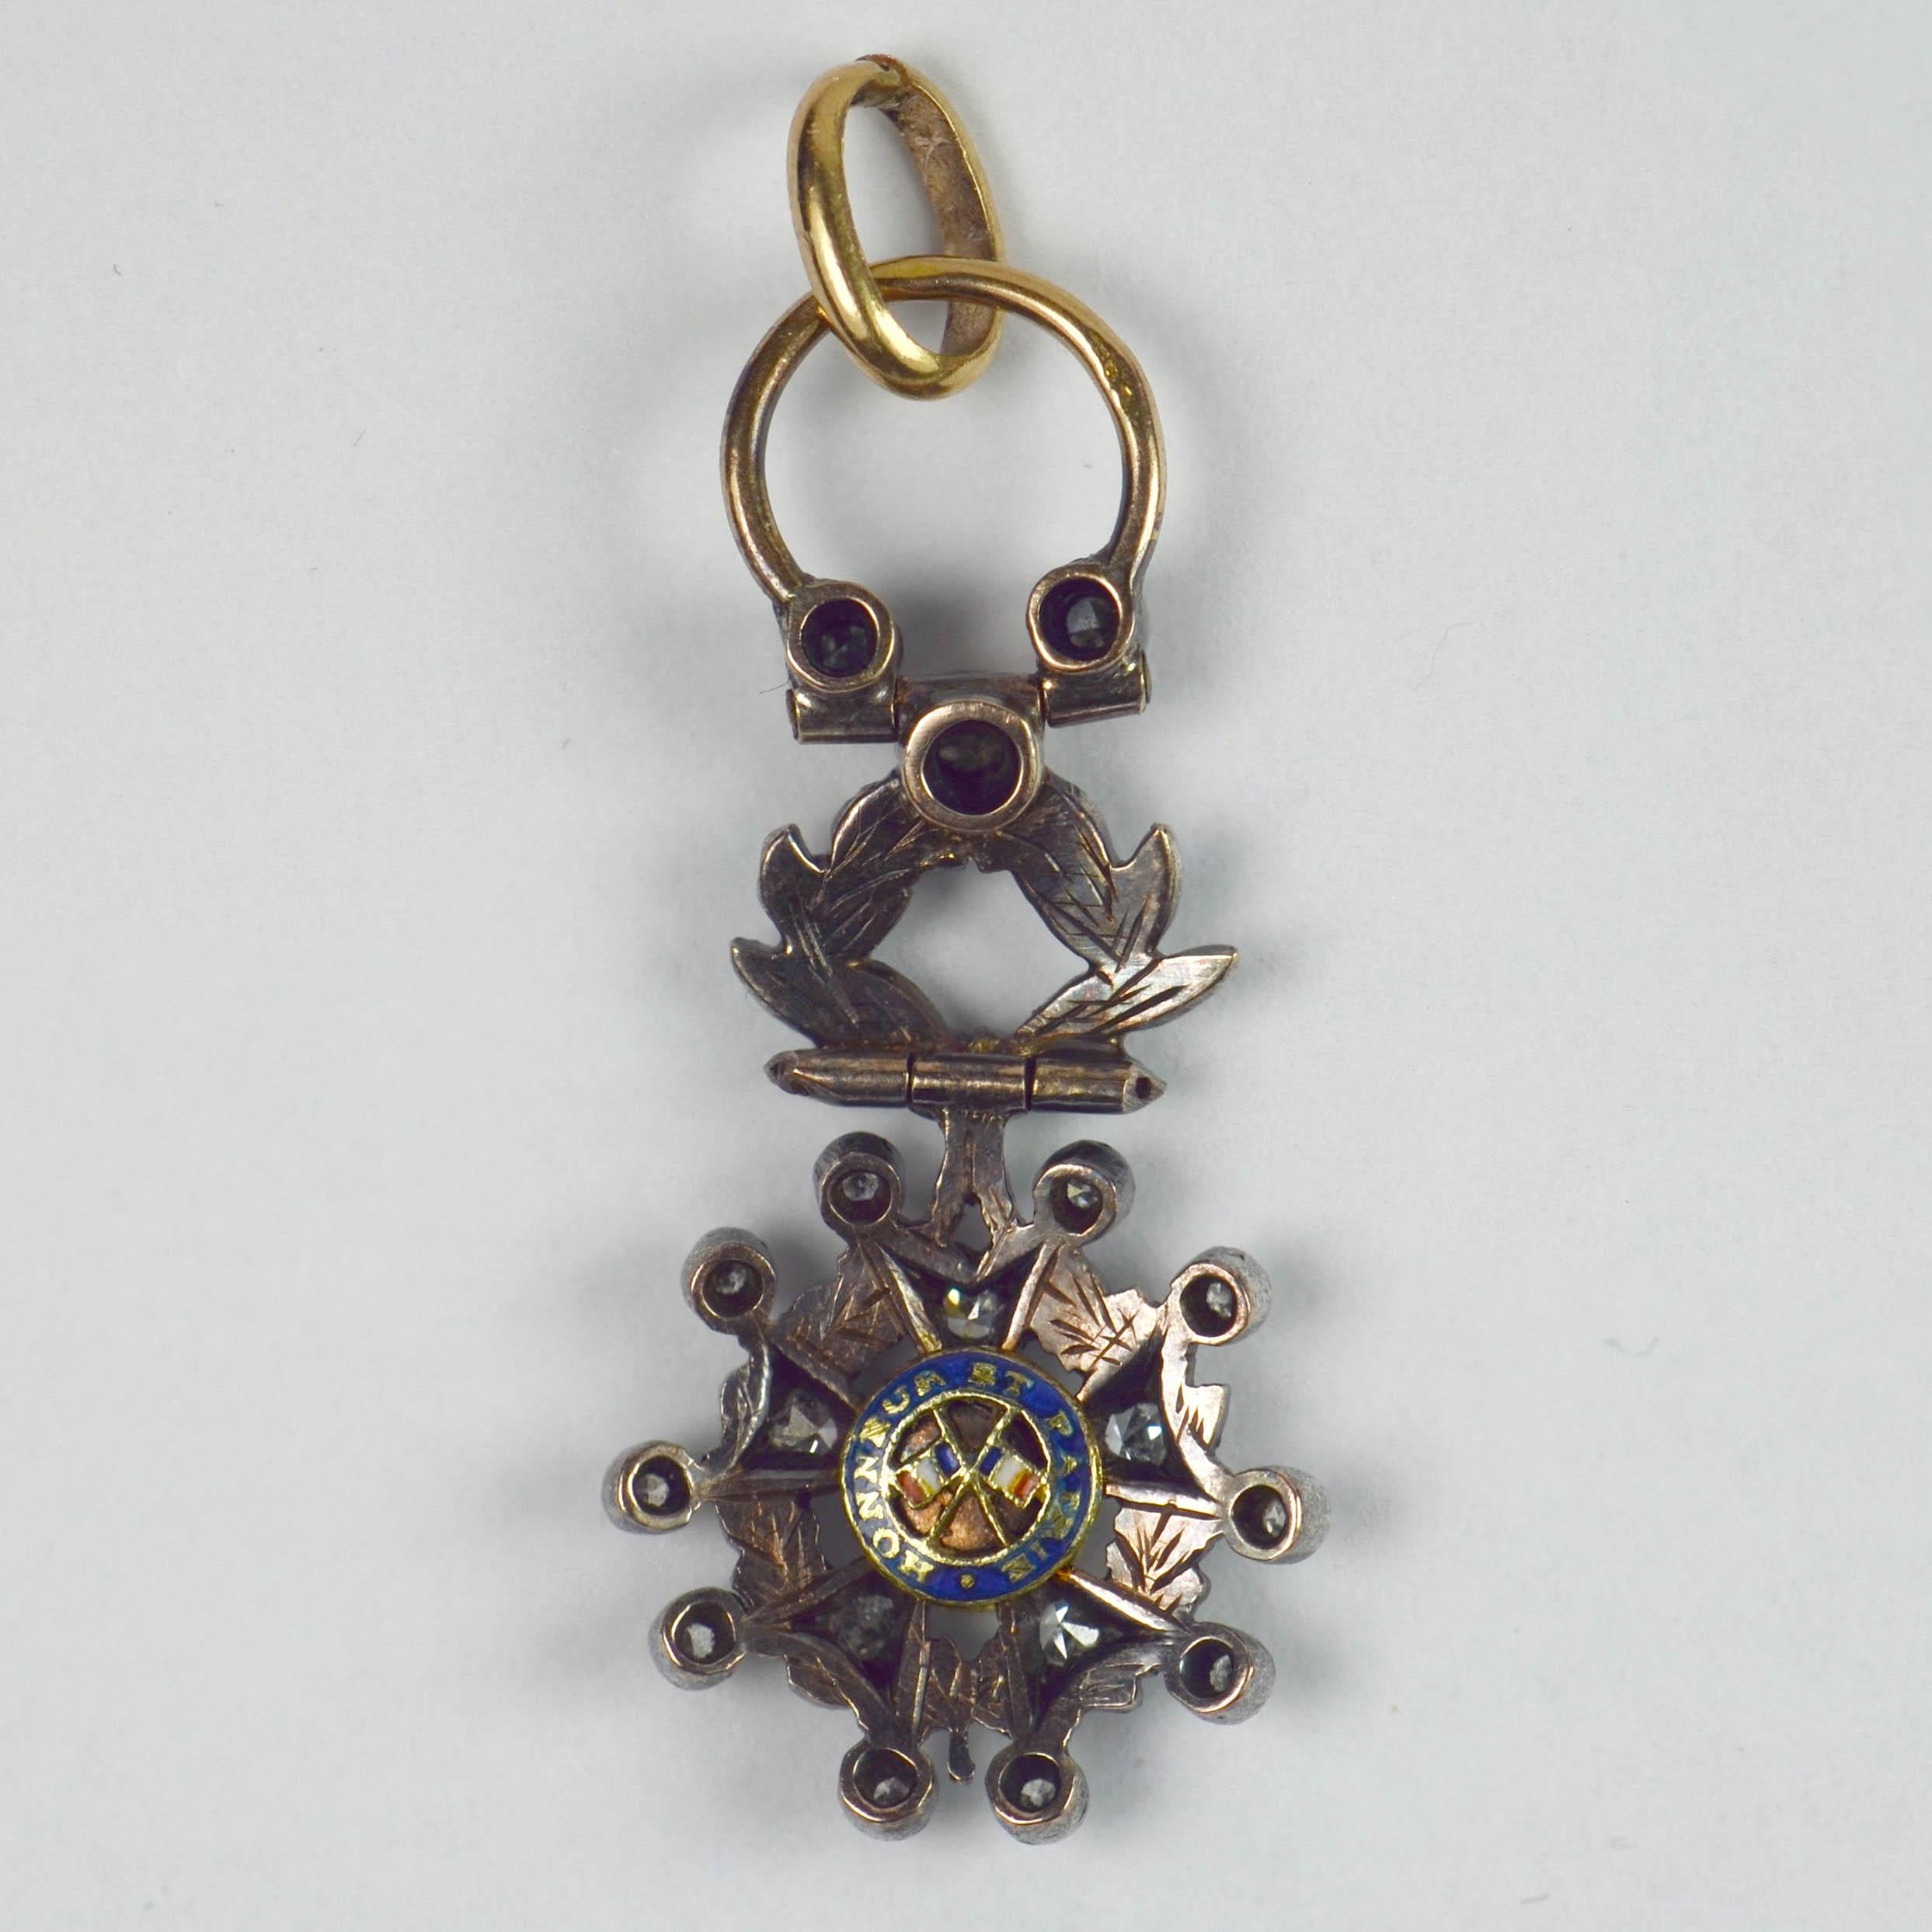 A French 18 karat (18K) yellow gold, silver and base metal charm pendant designed as a miniature Legion d'Honeur medal. Set with 18 single-cut diamonds with a total approximate weight of 0.36 carats, and highlighted with green enamel. 

Dimensions: